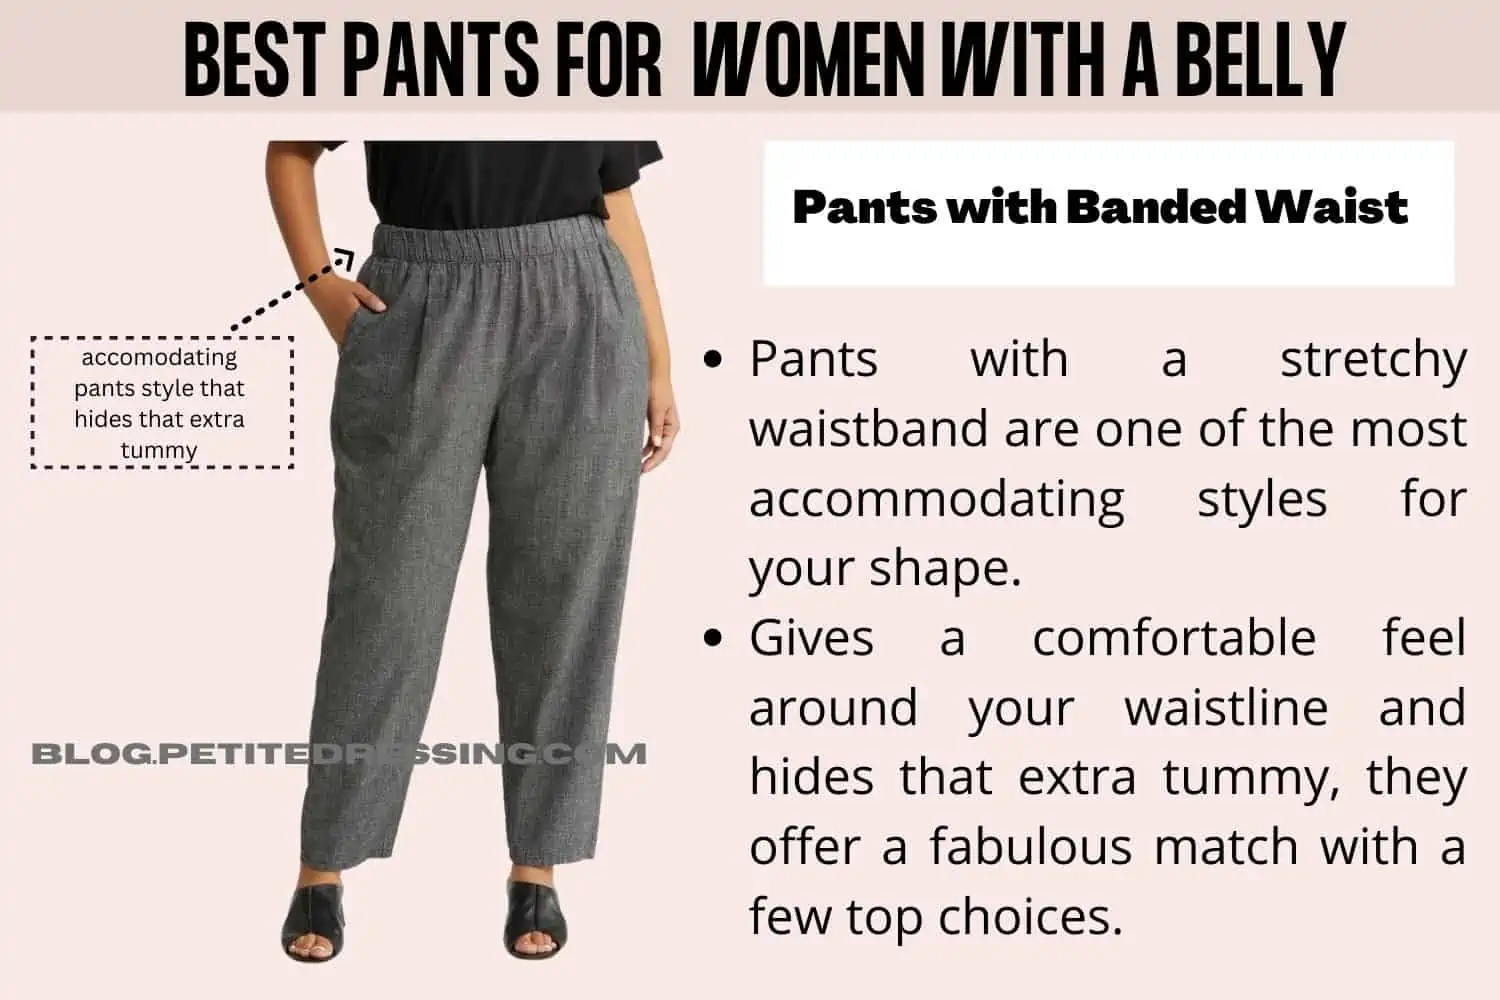 Tummy-slimmer Trousers - Trousers 